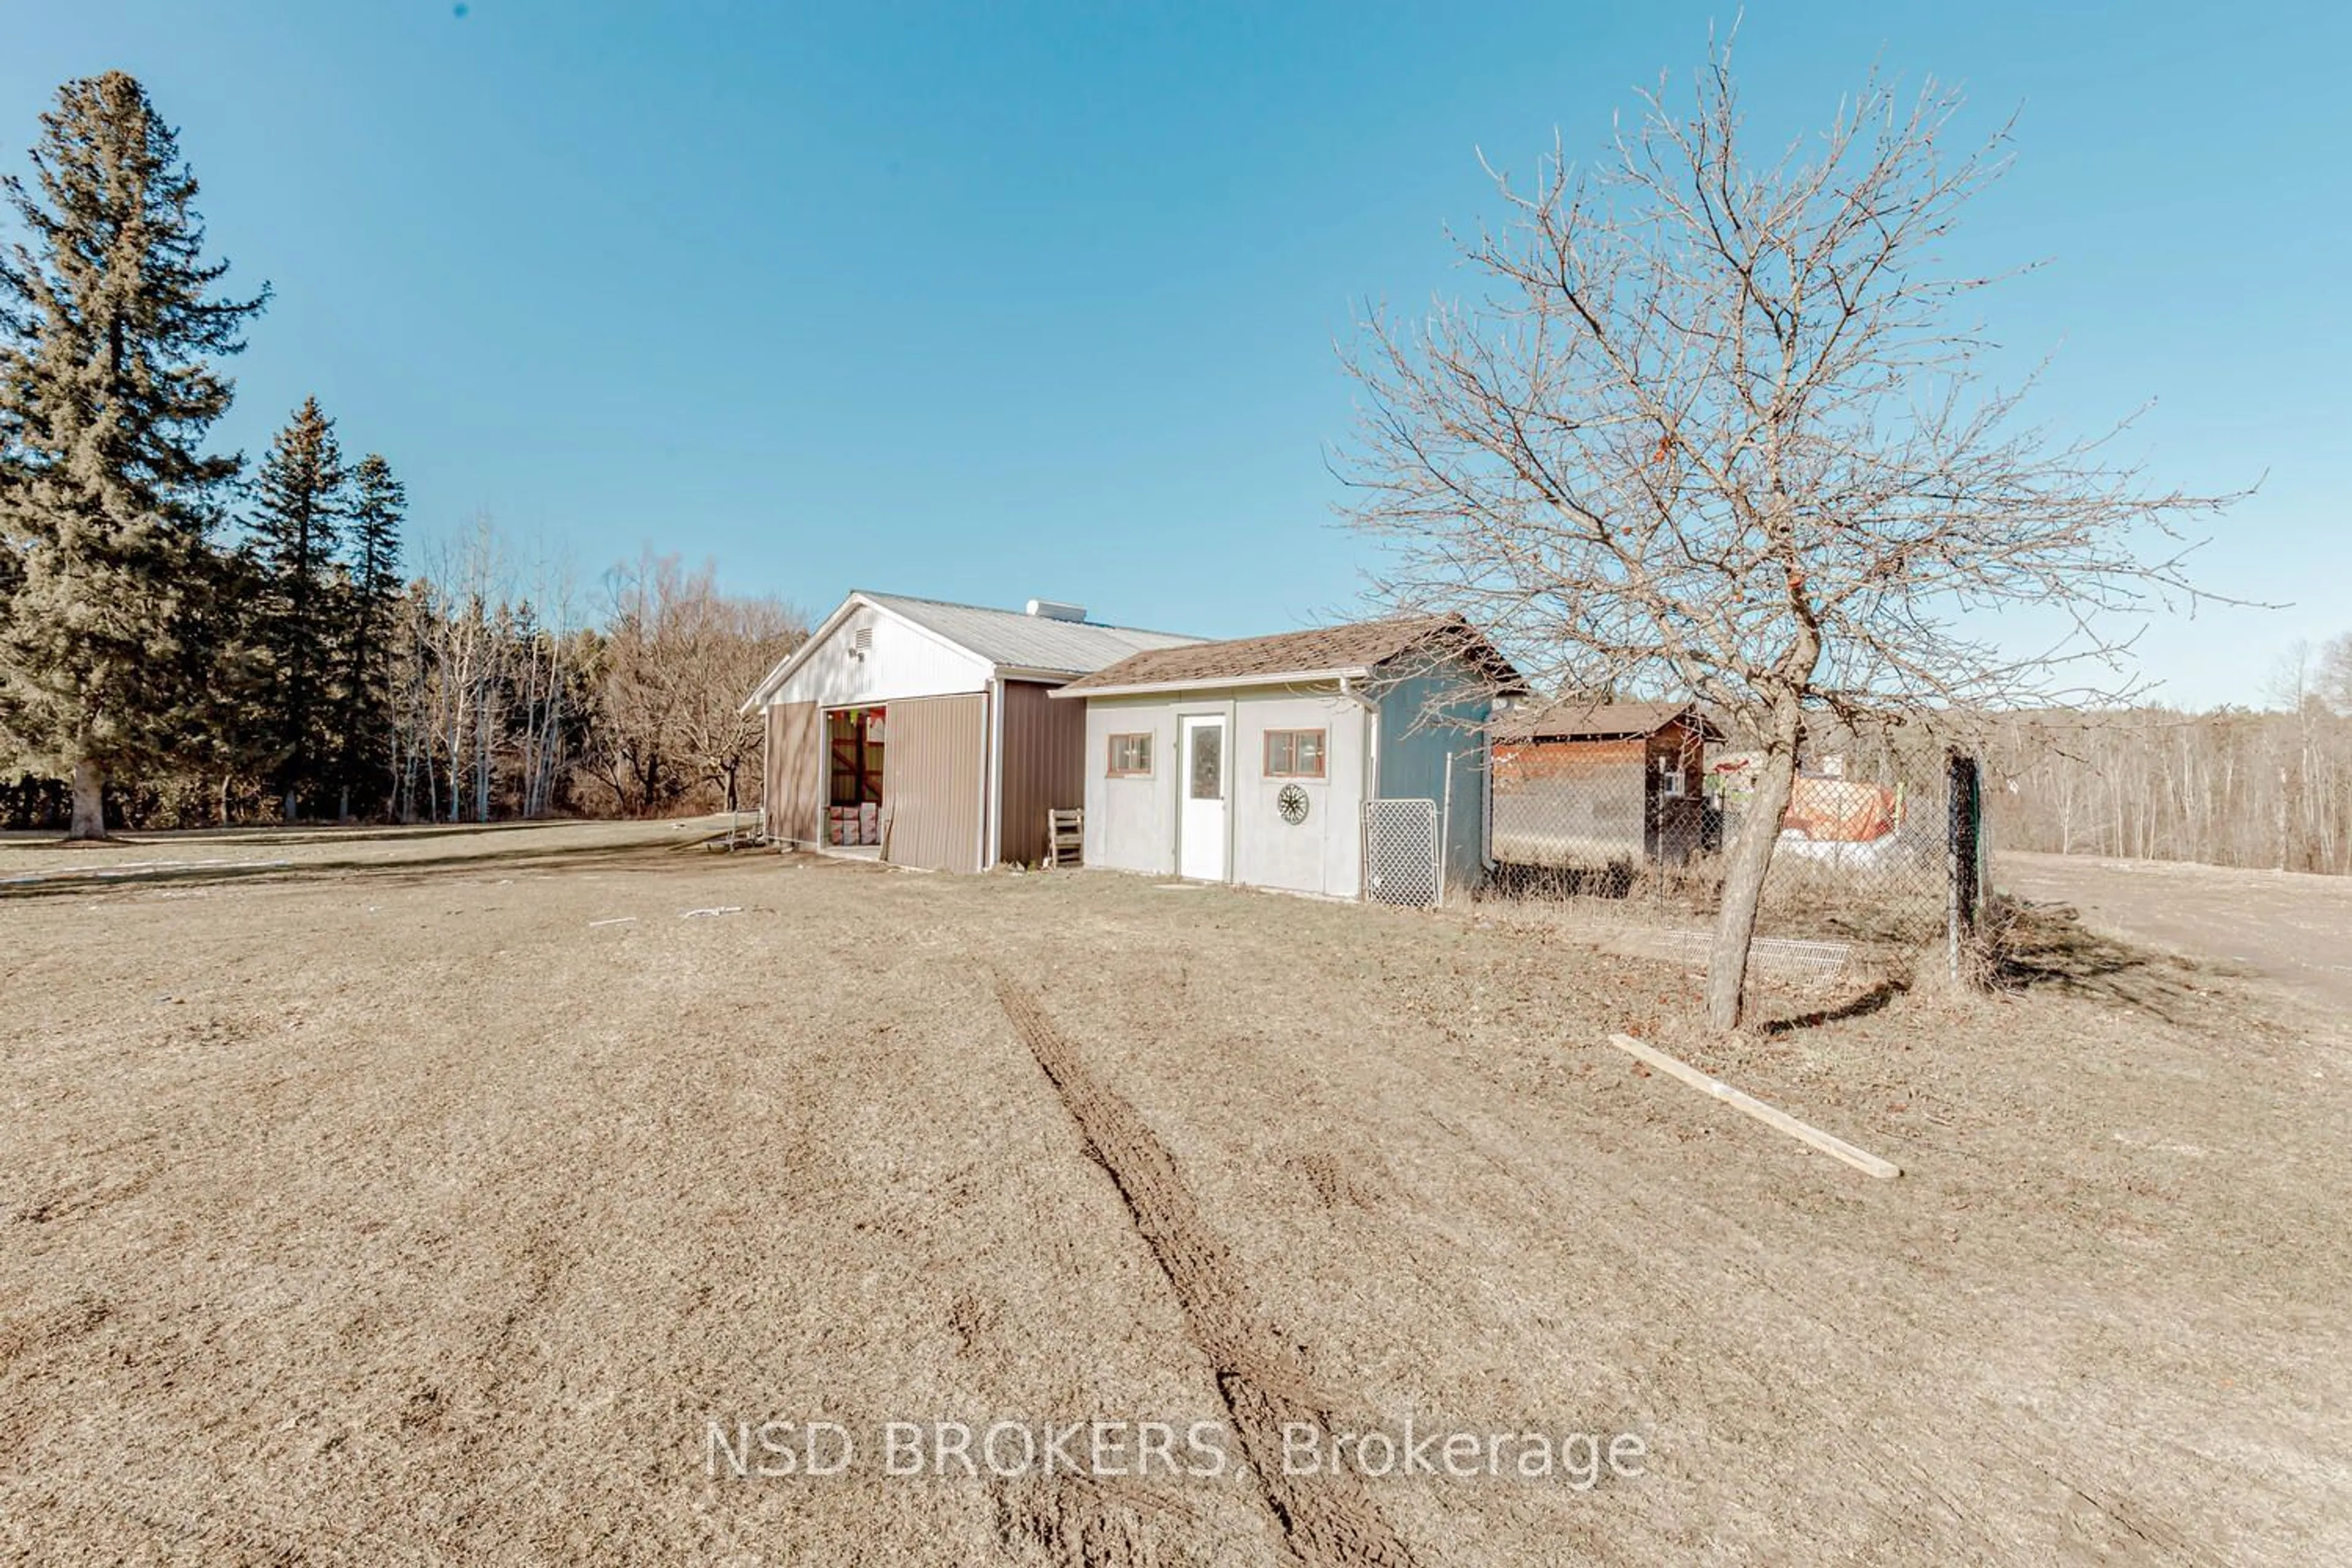 Frontside or backside of a home for 15863 Heart Lake Rd, Caledon Ontario L7C 2L2